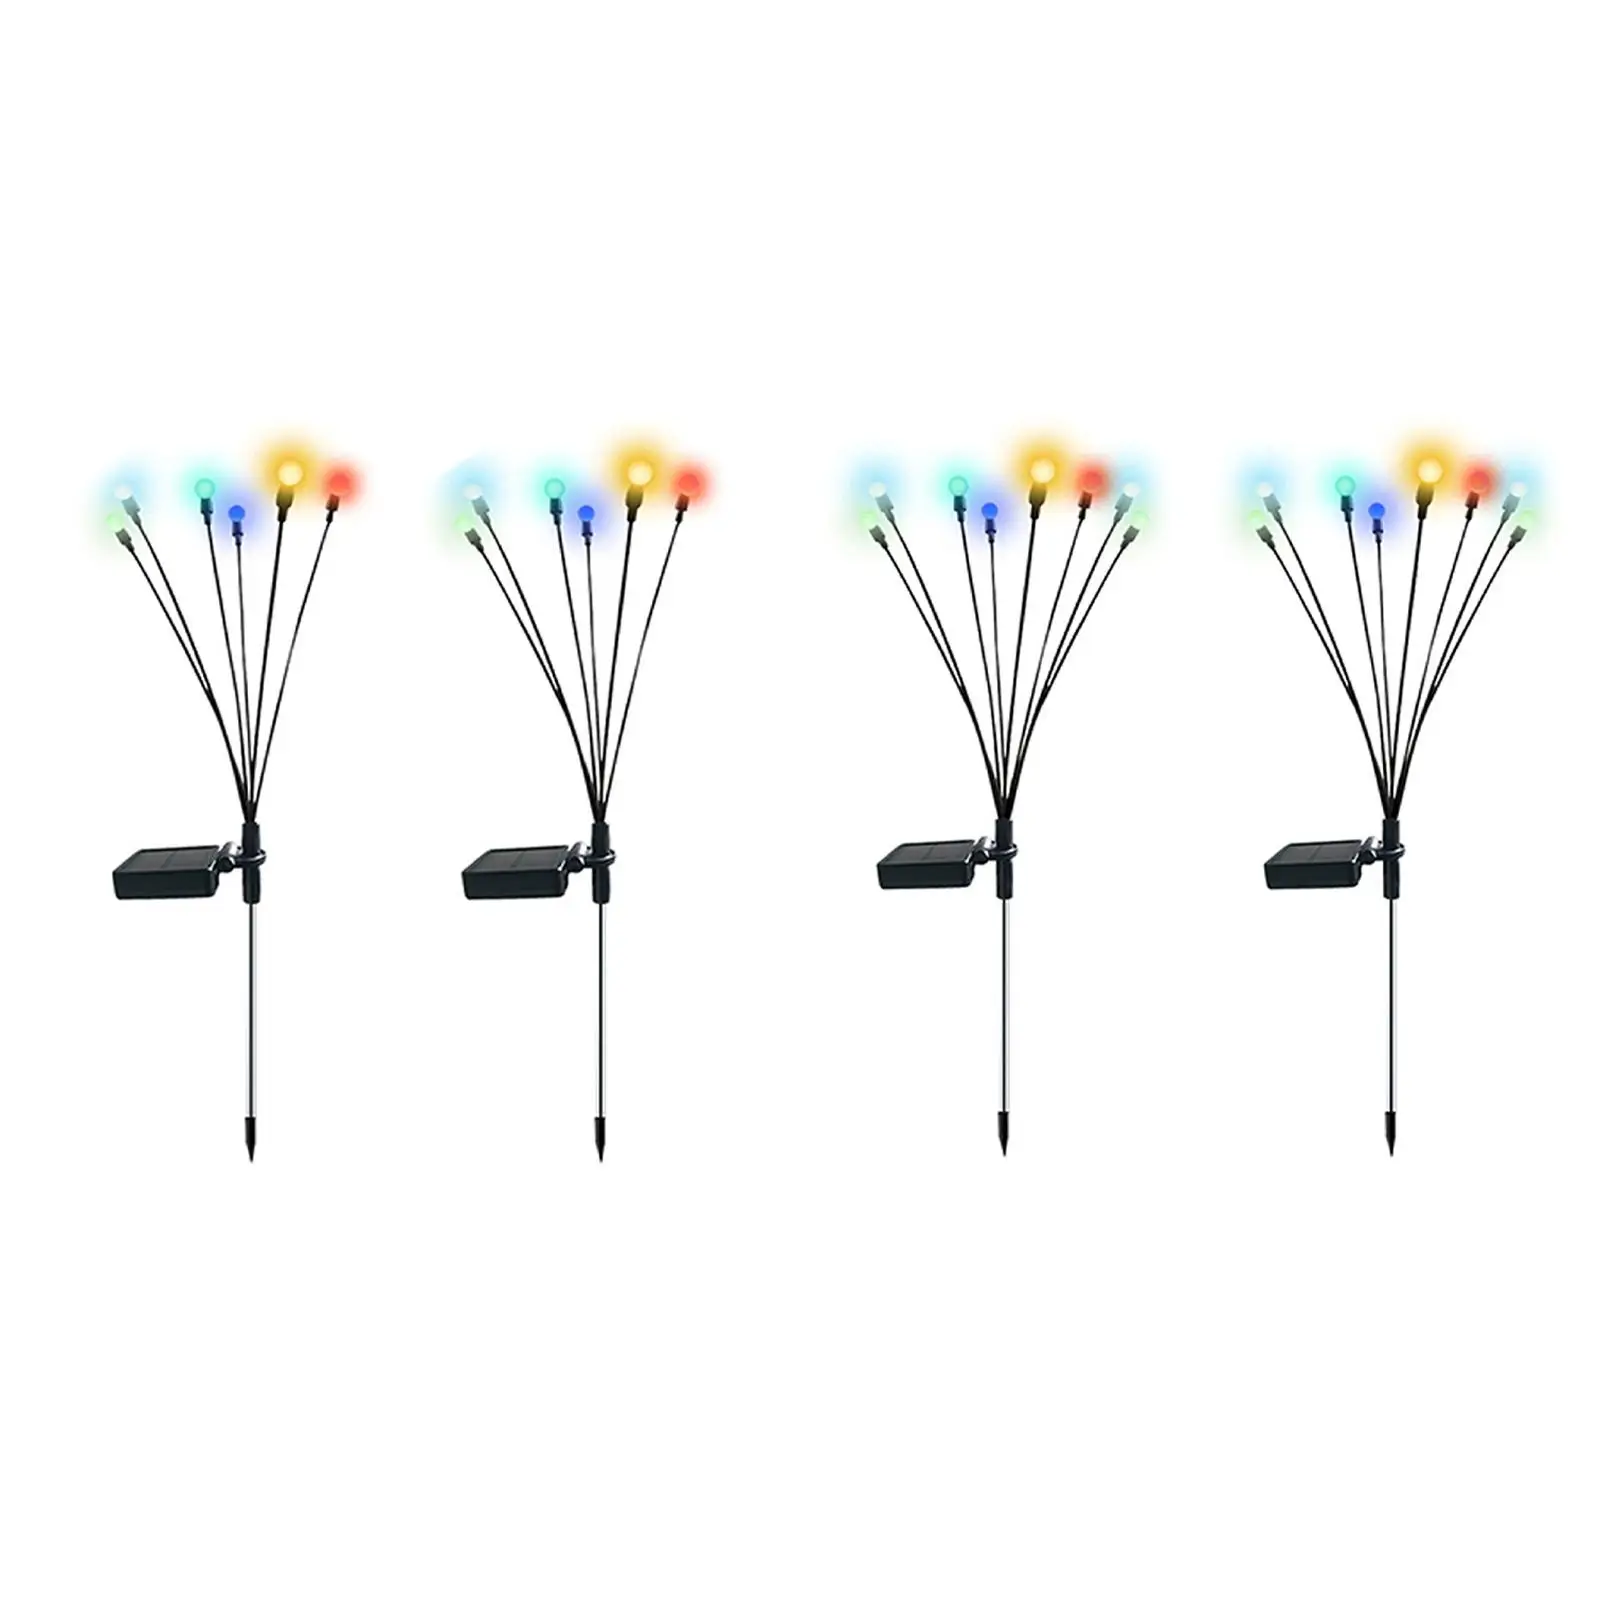 Solar Lights Waterproof Multi Color Ornamental Lights Swaying Light Decorative Lamp Stake for Yard Outdoor Pathway Garden